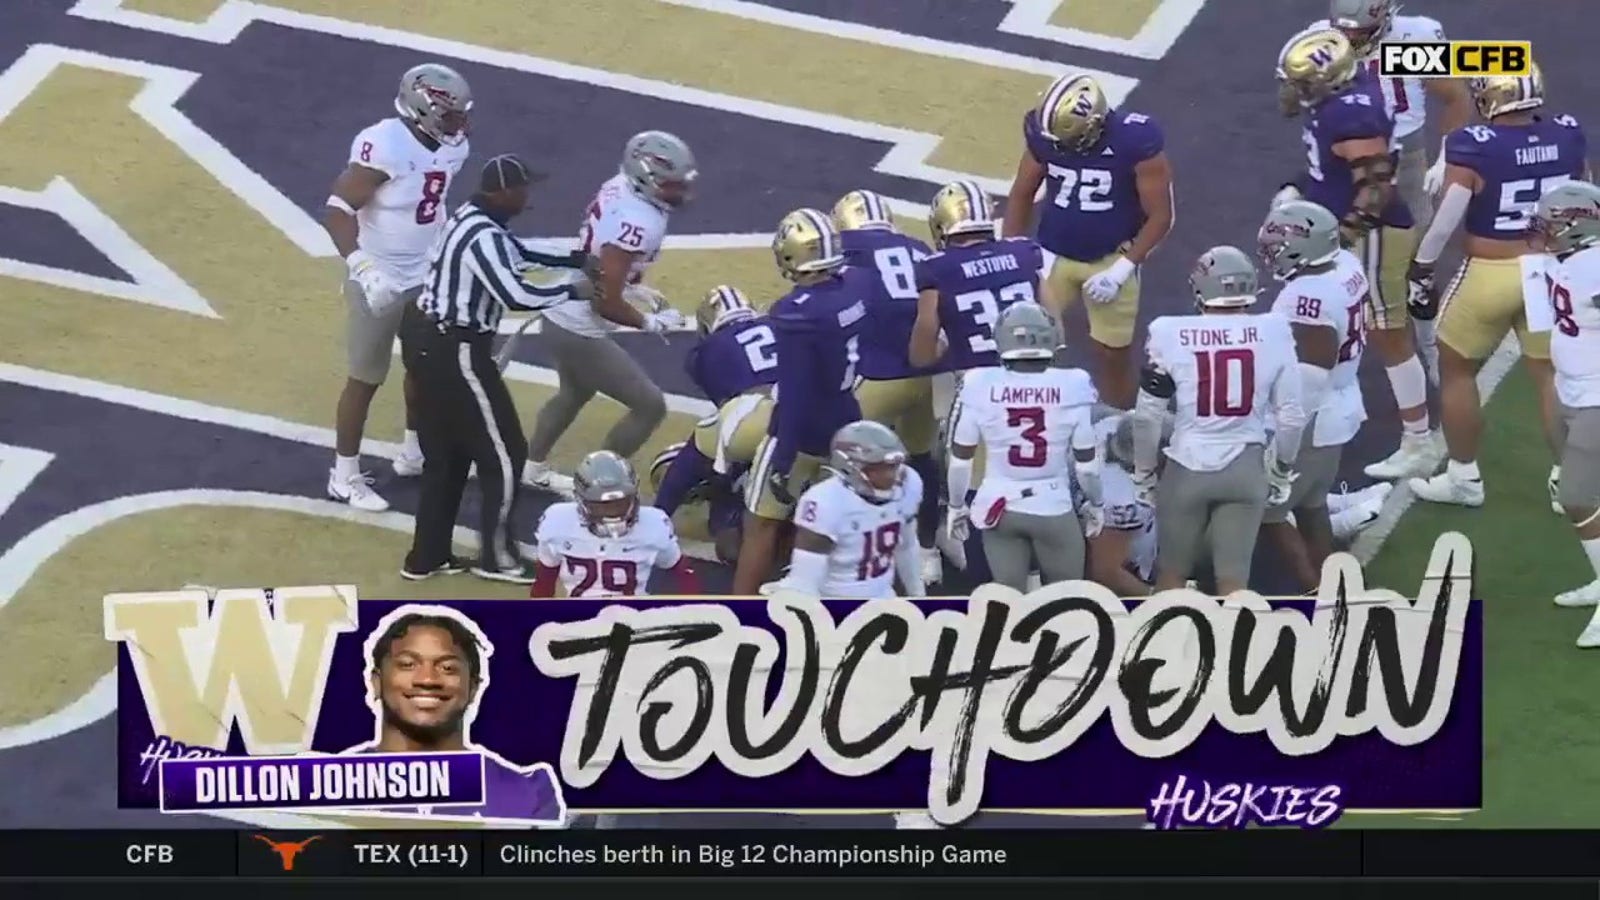 Dillon Johnson punches in a 1-yard TD to give Washington the lead vs. Washington State